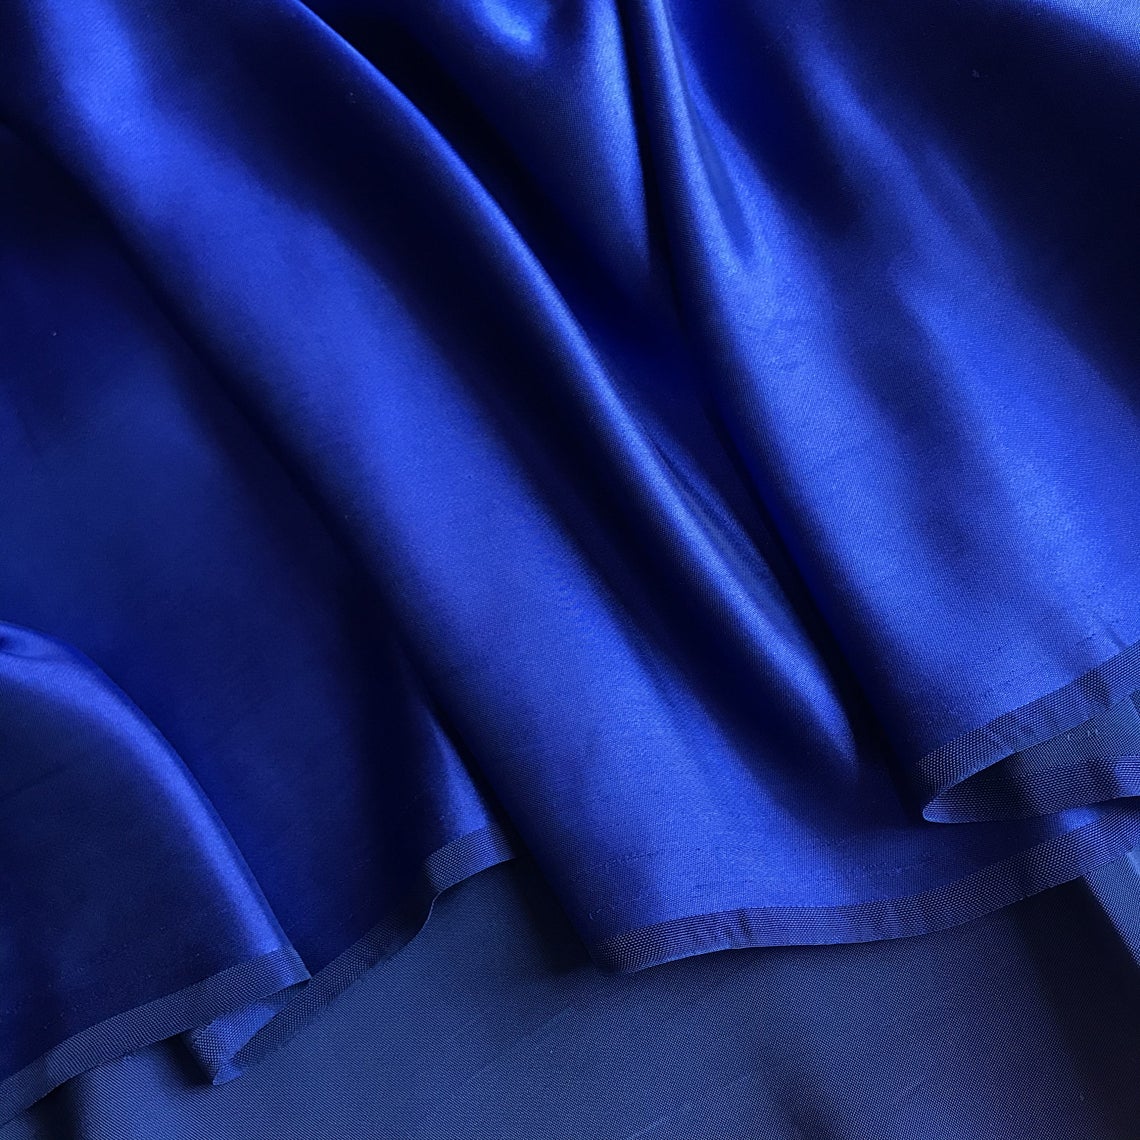 Royal Blue Silk fabric by the yard - Natural silk - Pure Mulberry Silk